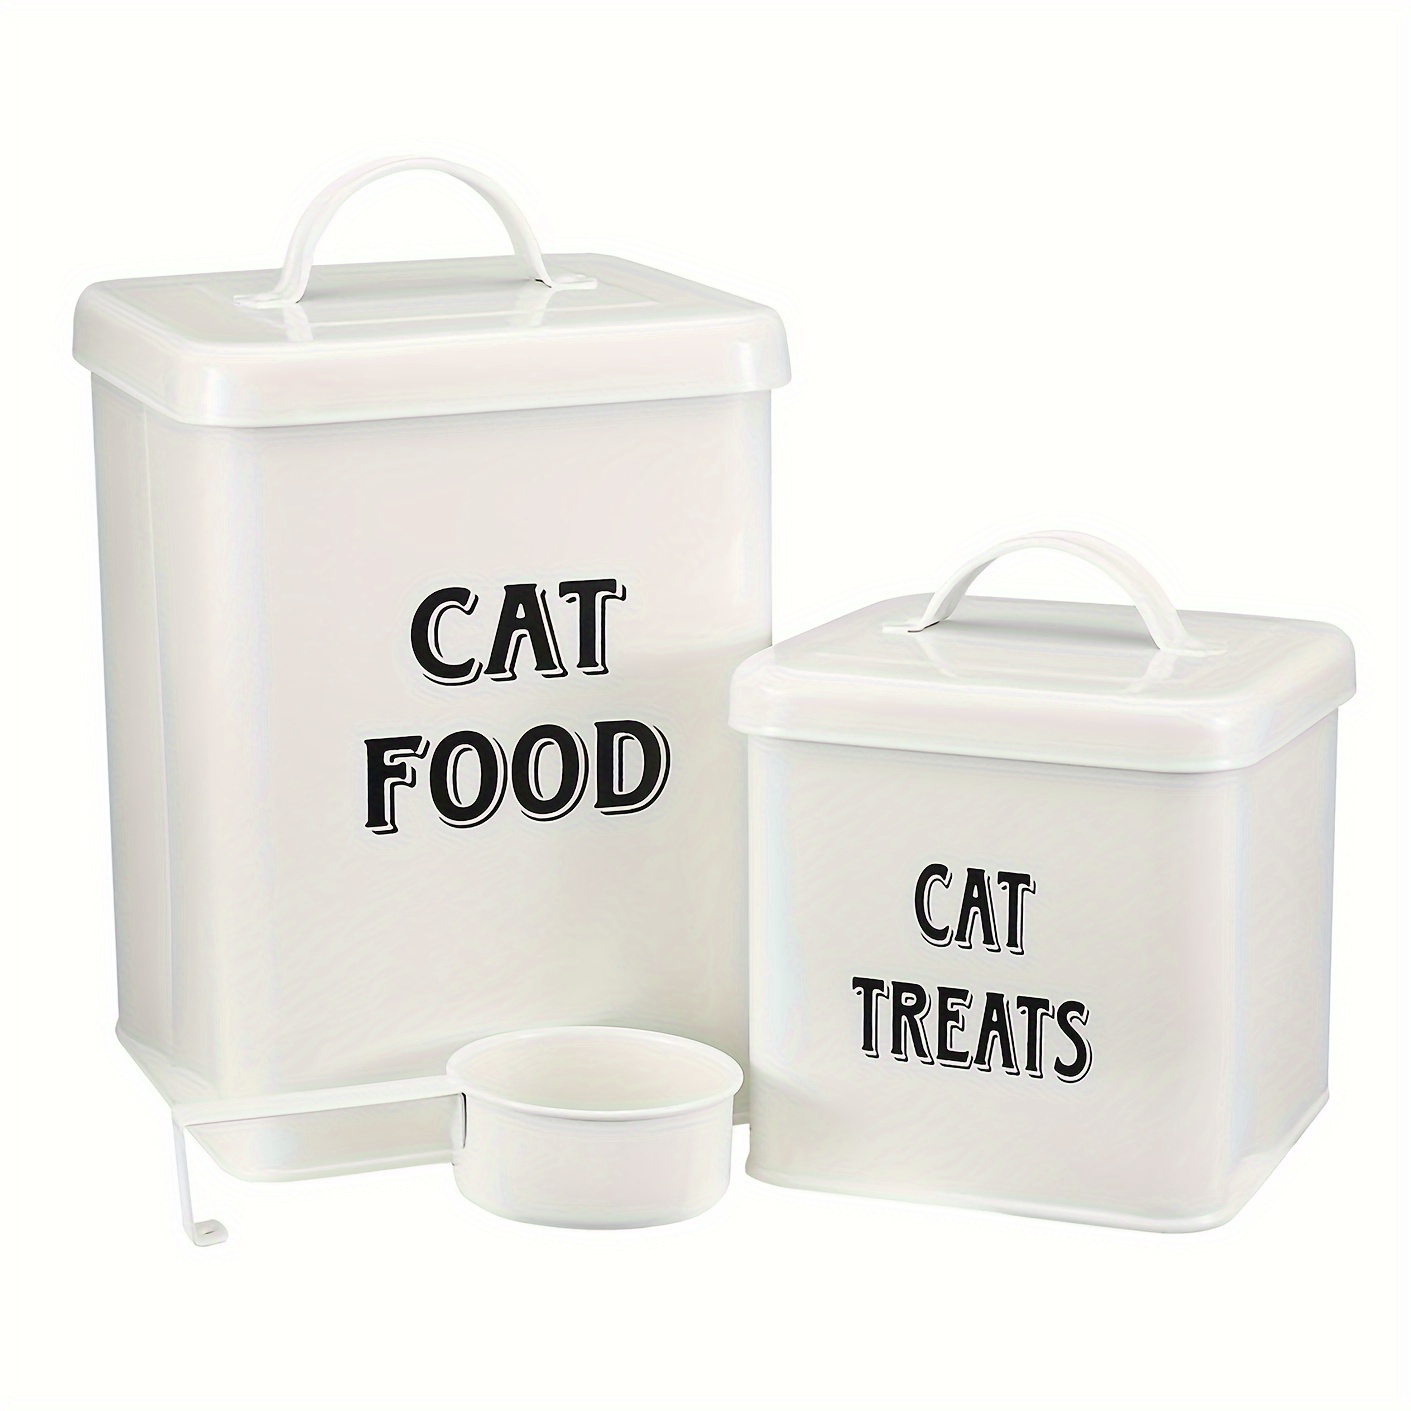 

2-piece Metal Cat Food And Treats Storage Set With Airtight Lid And Scoop, Sturdy Pet Food Container For Cats, Farmhouse White Style - Uncharged, No Battery Required